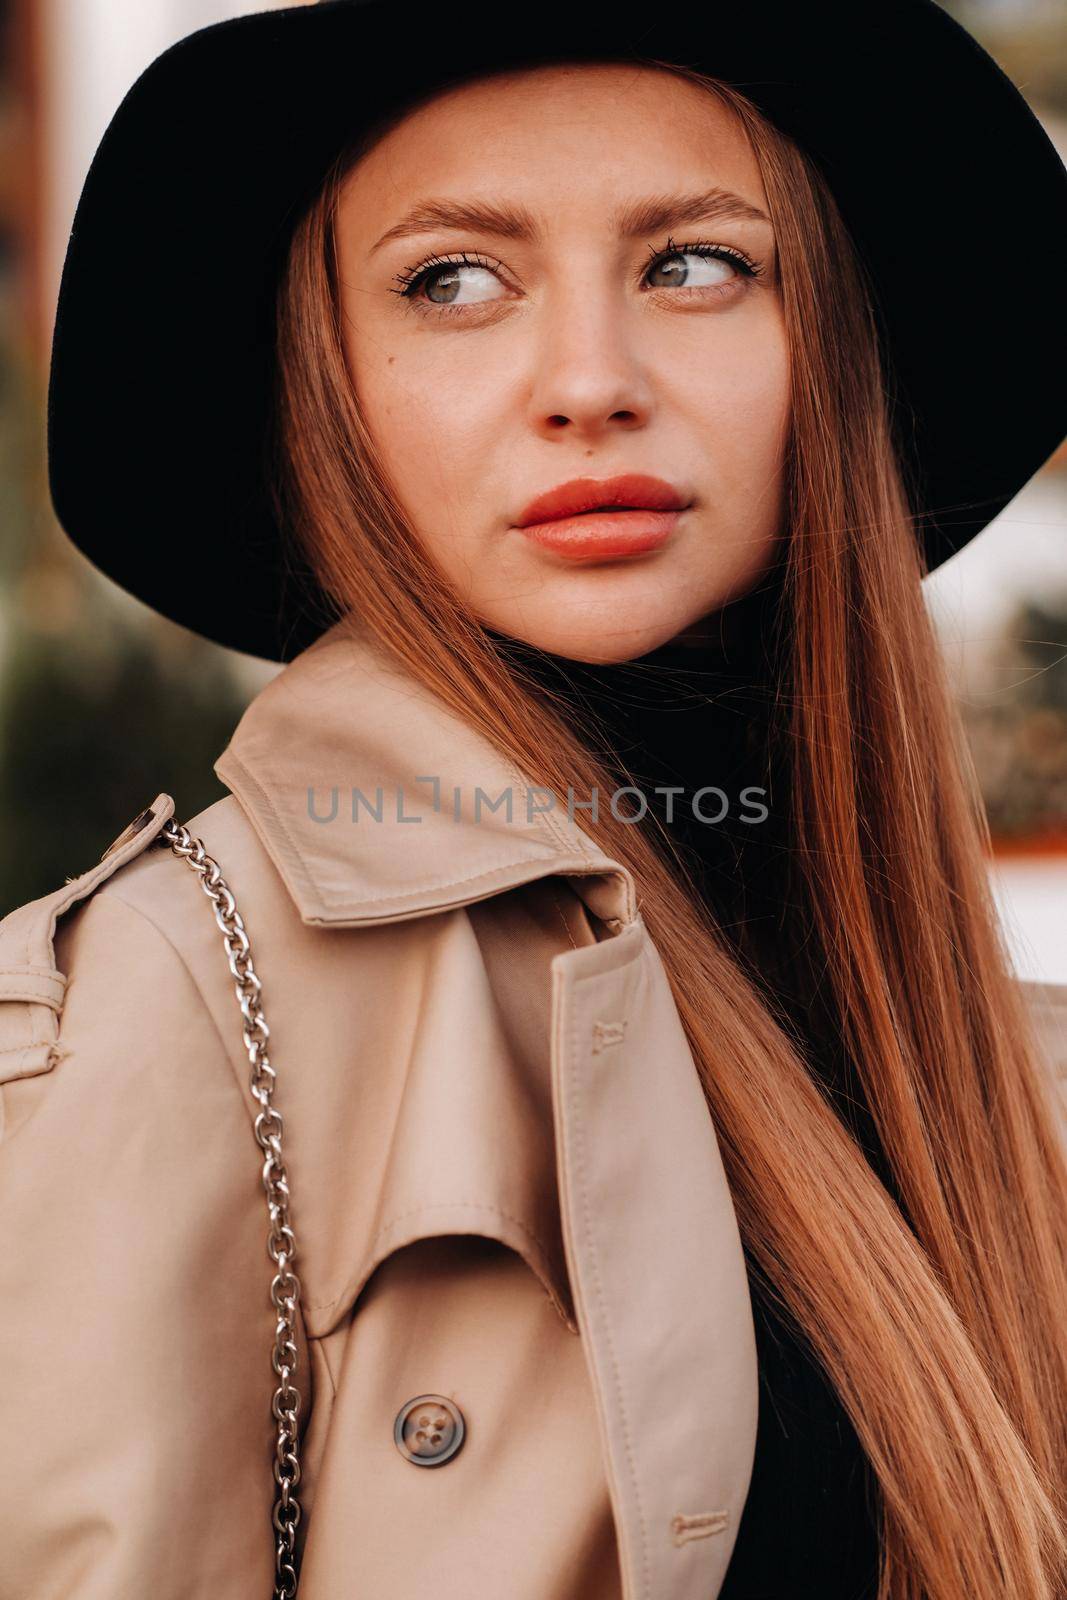 Portrait of a girl in a beige coat and black hat on a city street. Women's street fashion. Autumn clothing.Urban style.